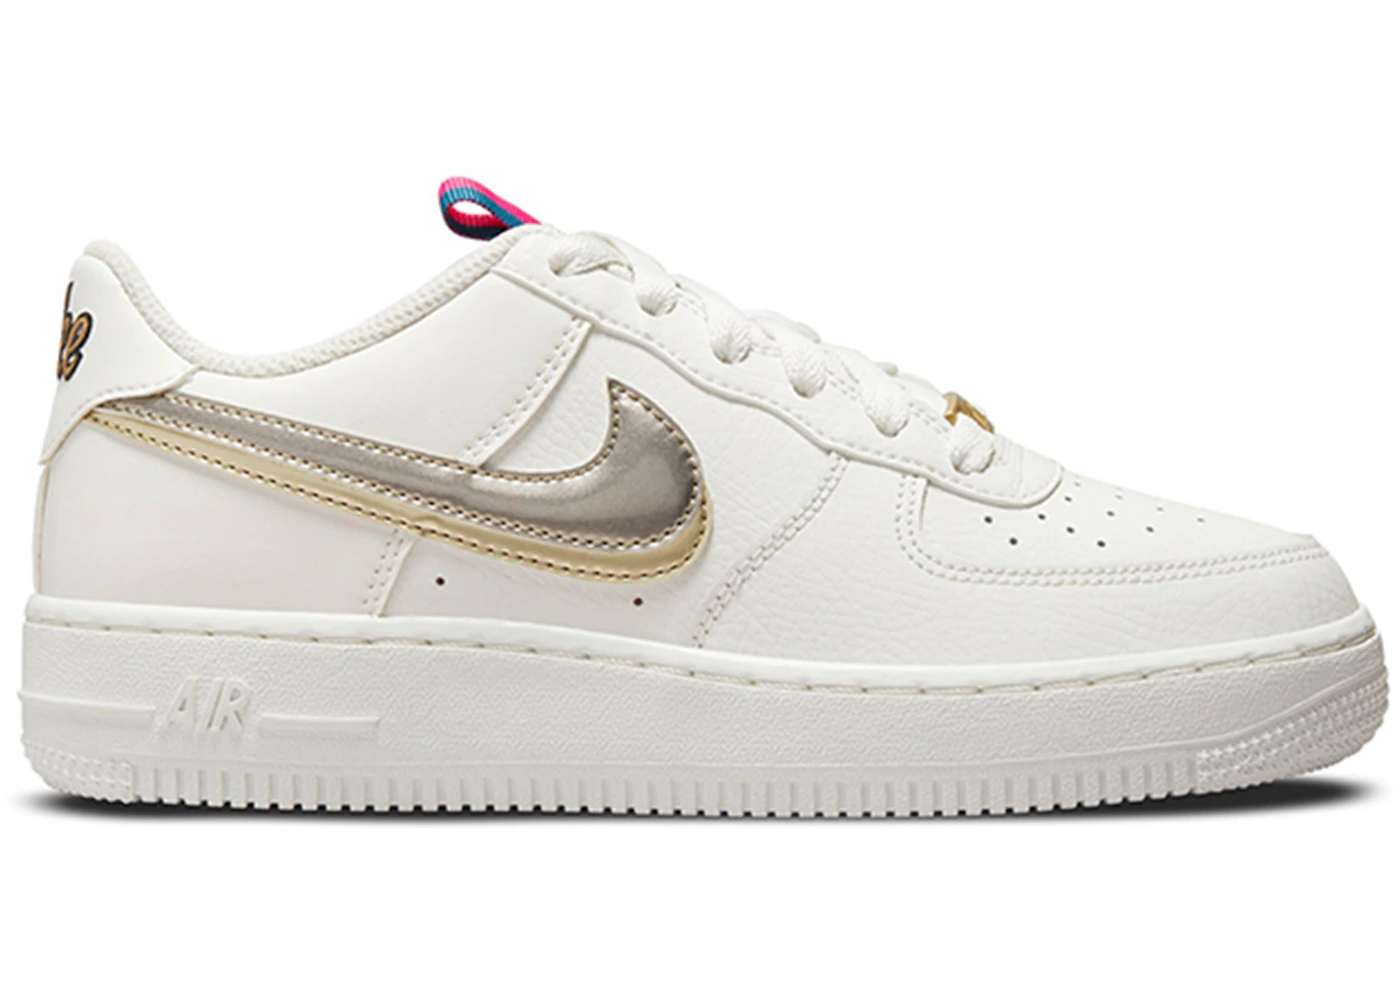 Nike Air Force 1 Lv8 Double Swoosh Silver Gold (Gs) Kids' - Dh9595-001 - Us